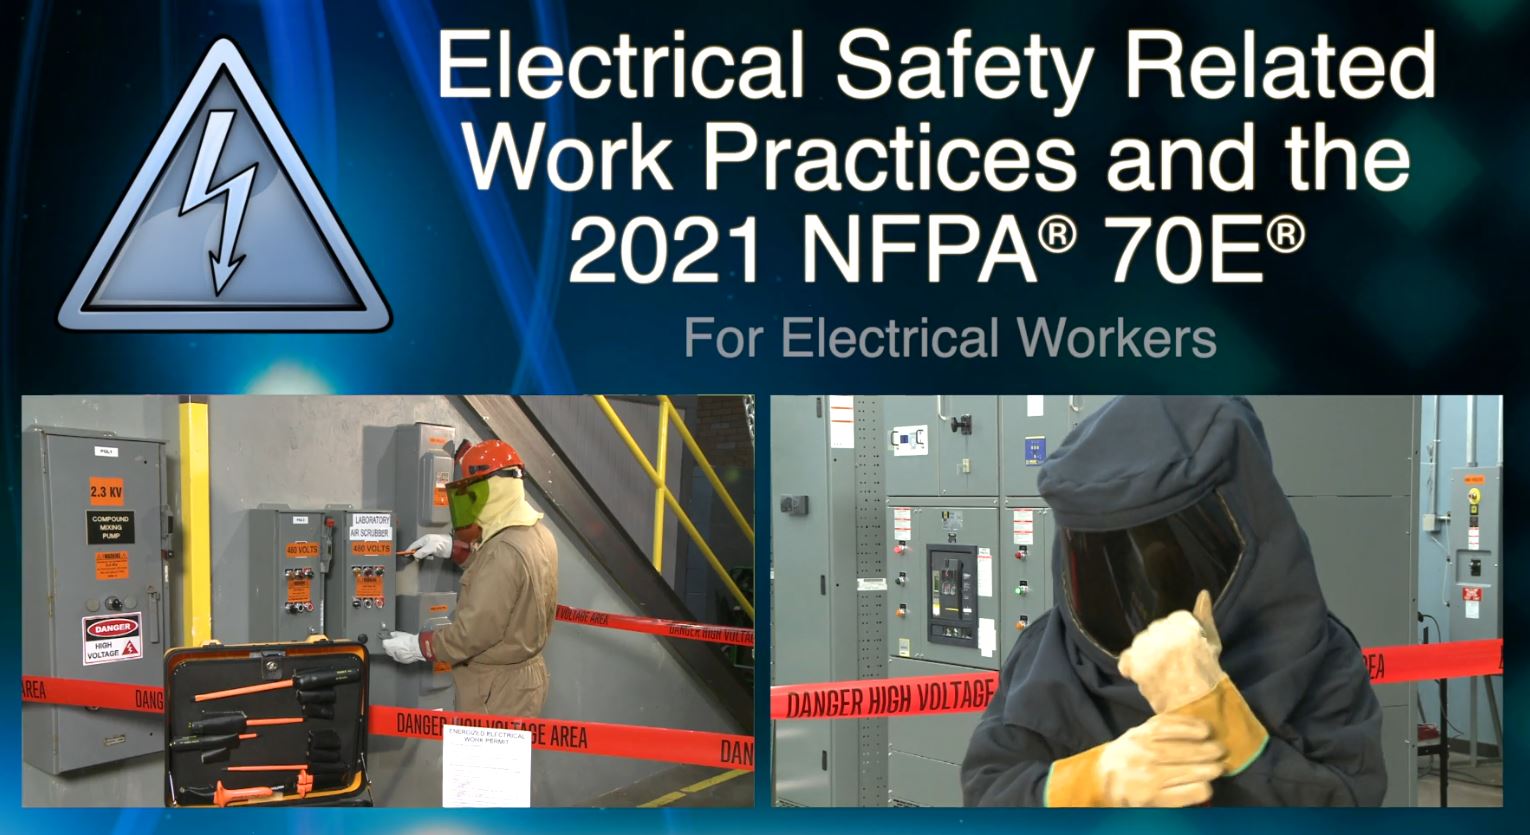 2021 NFPA 70E for Electrical Workers